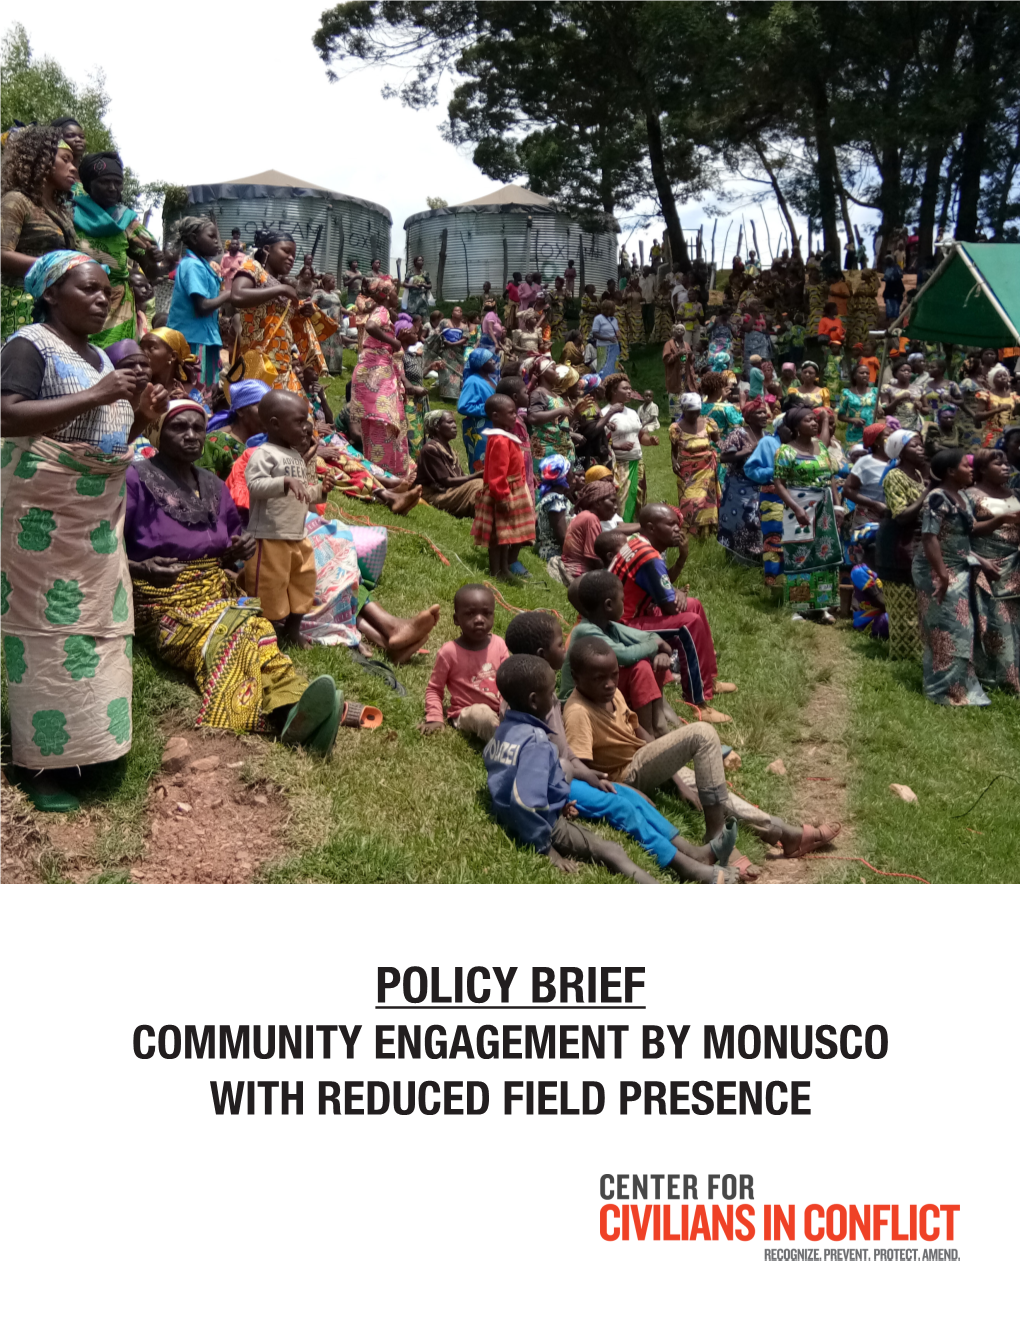 POLICY BRIEF COMMUNITY ENGAGEMENT by MONUSCO with REDUCED FIELD PRESENCE Civiliansinconfict.Org E T Education Andpersonaldevelopment